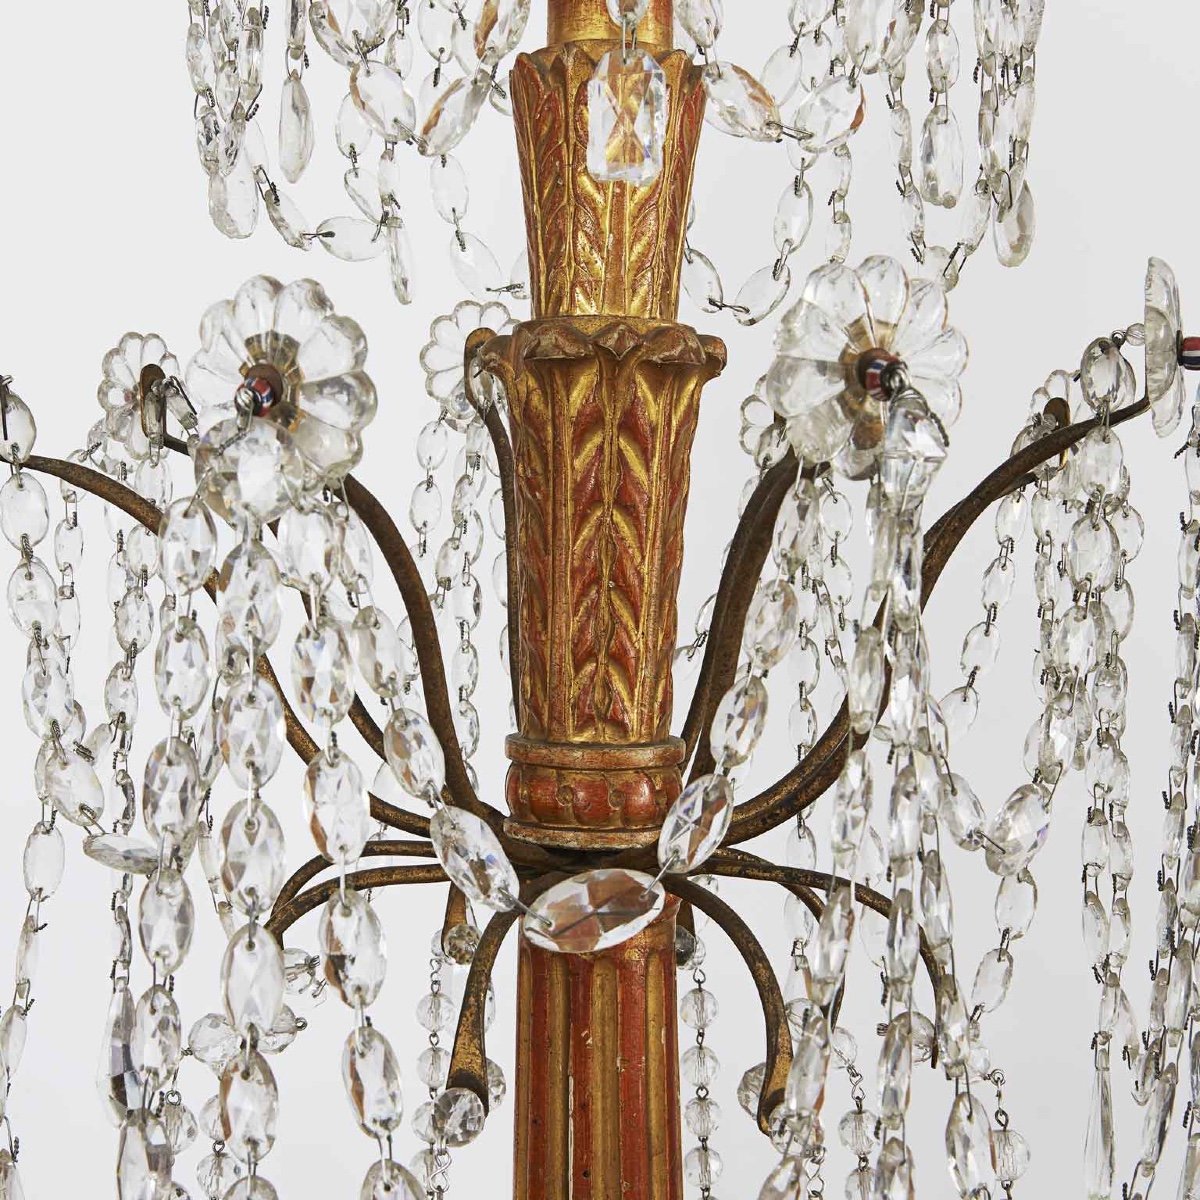 Louis XVI Genoese Chandelier In Gilded Wood And Crystals End 1700 Eight Lights -photo-4